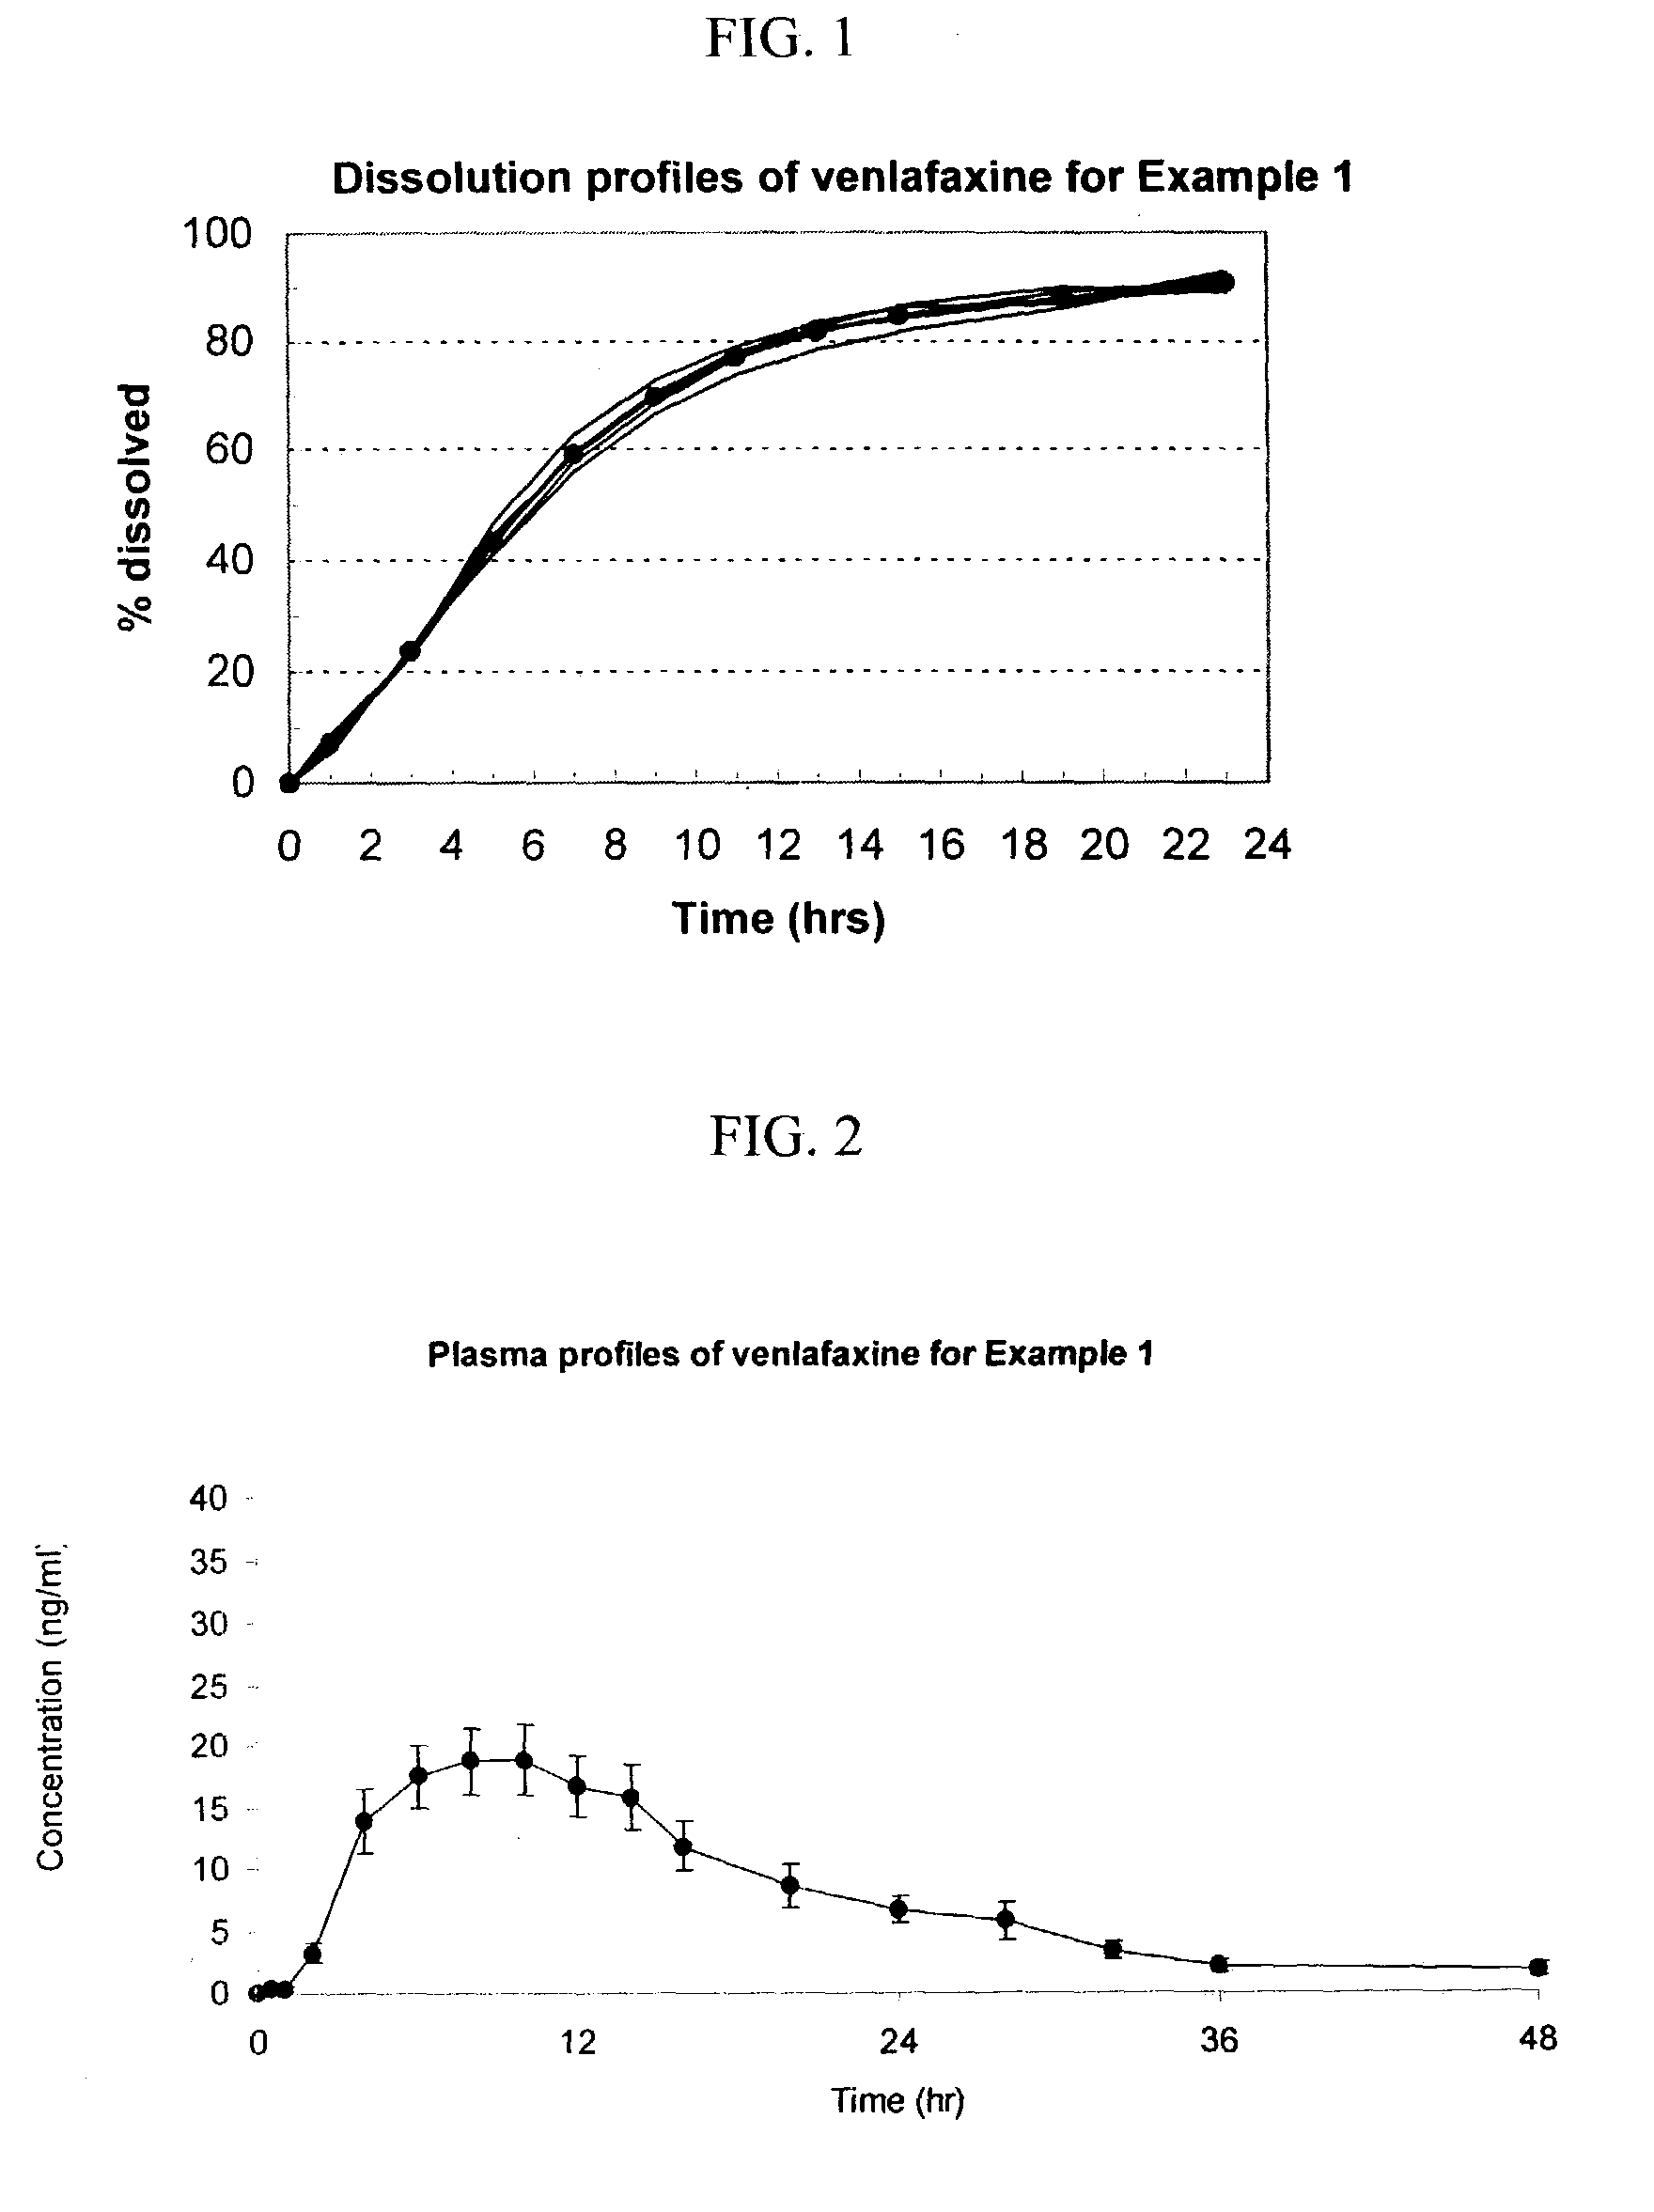 Osmotic device containing venlafaxine and an anti-psychotic agent